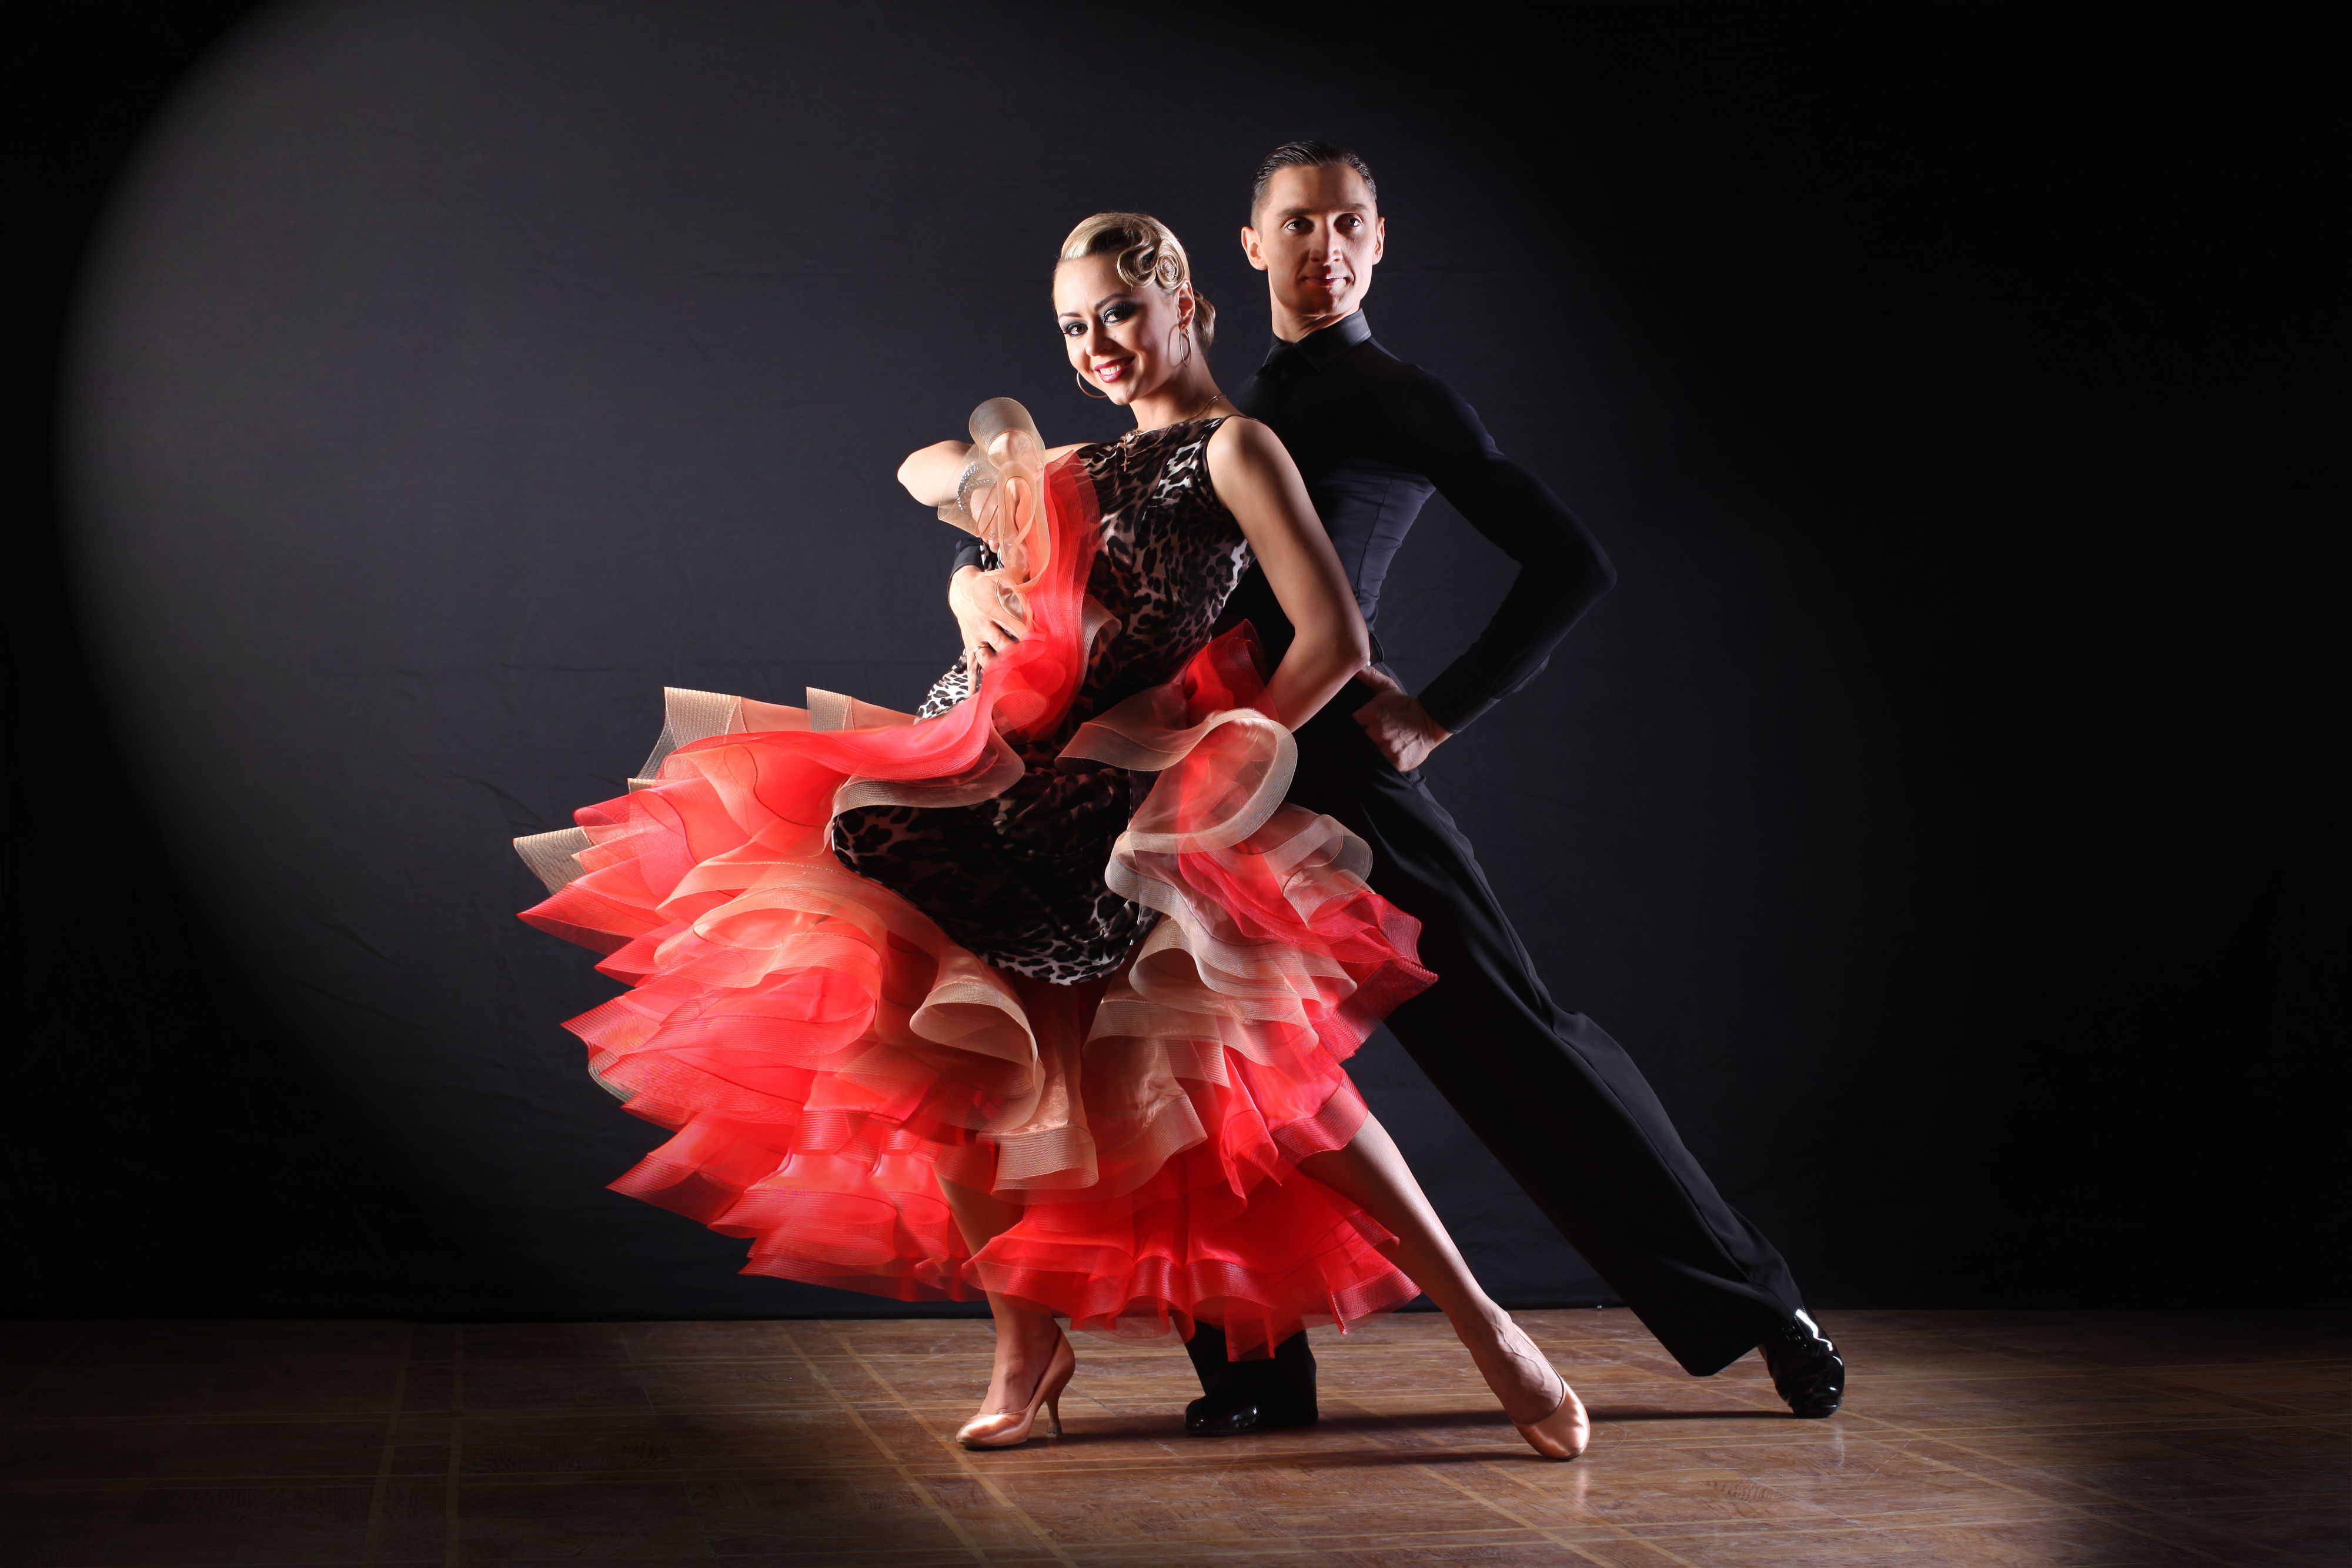 Preparing for your First Ballroom Dance Lessons | LSDA